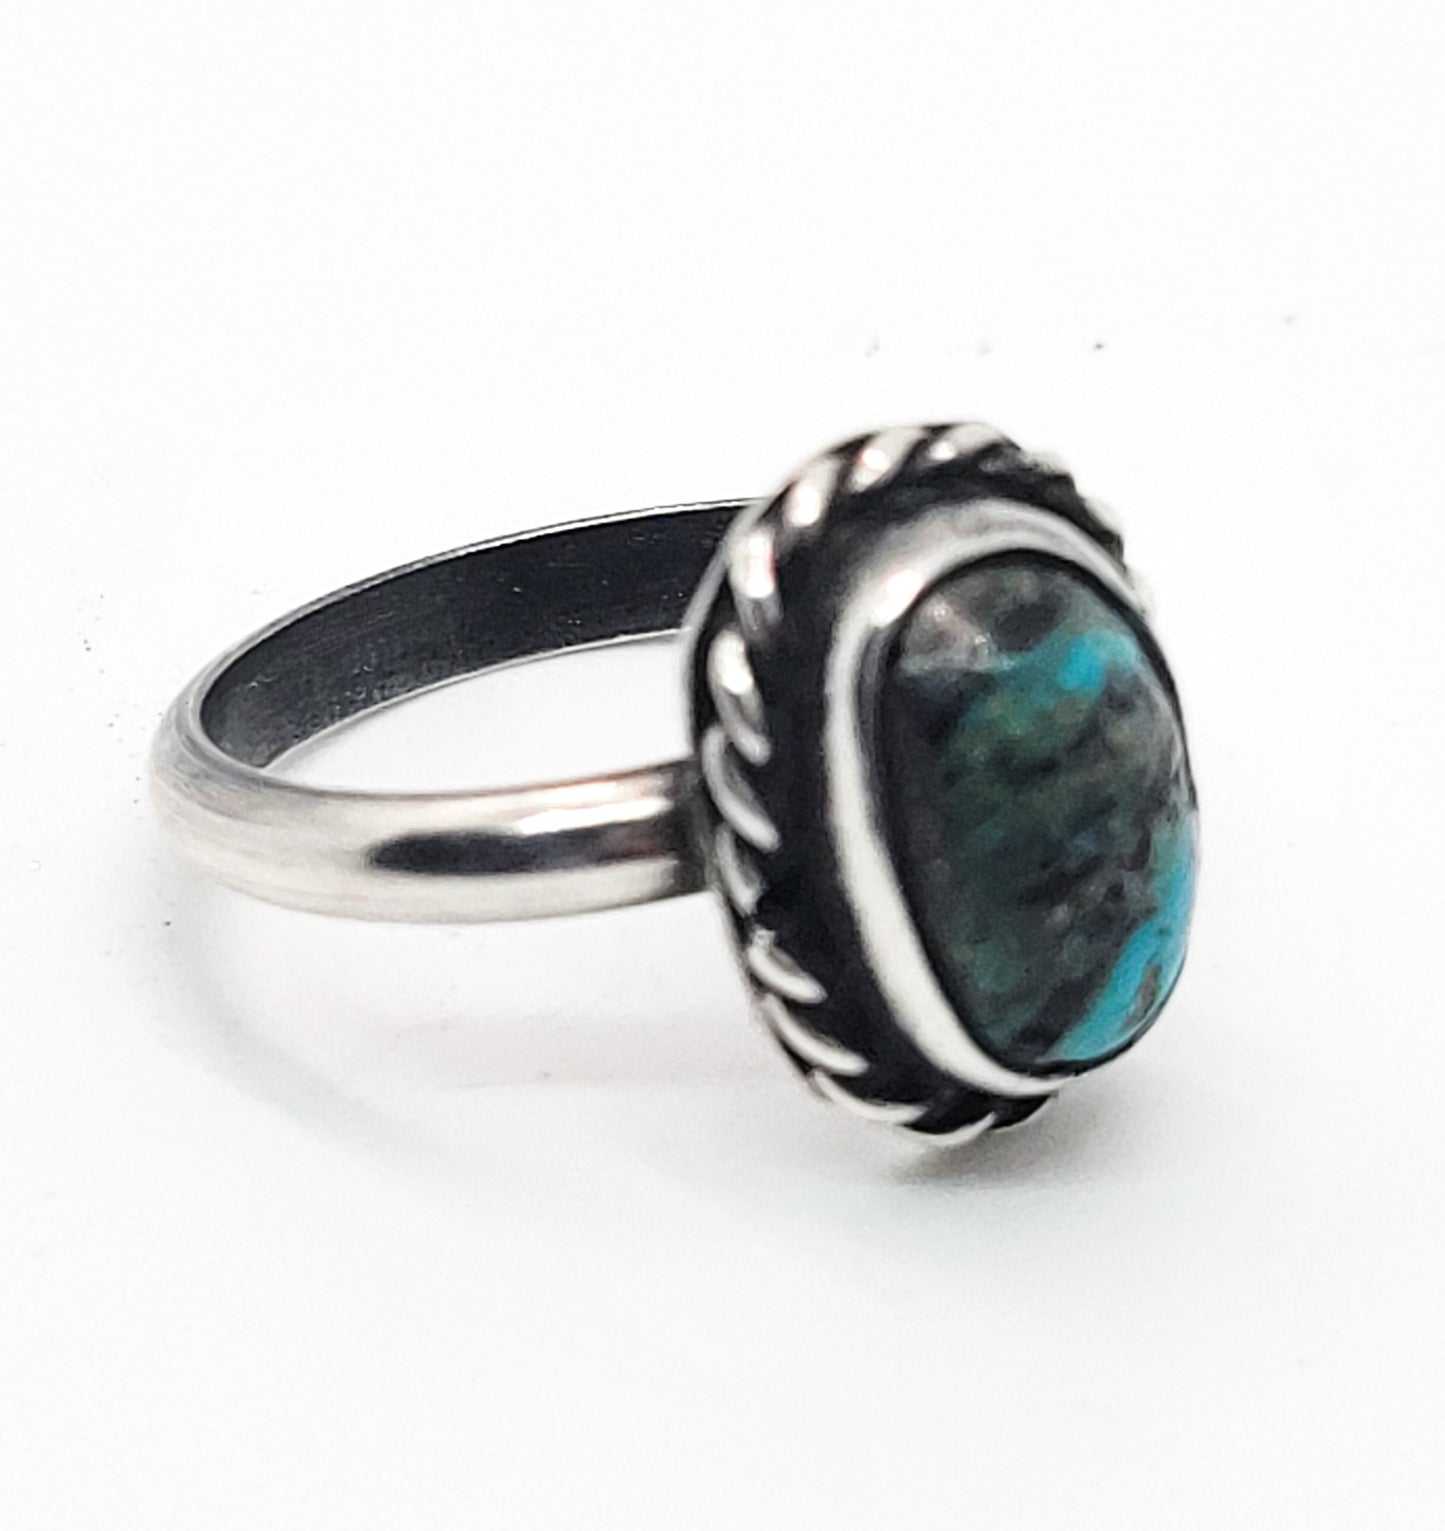 Turquoise Native American small twisted rope sterling silver gemstone ring size 5.5